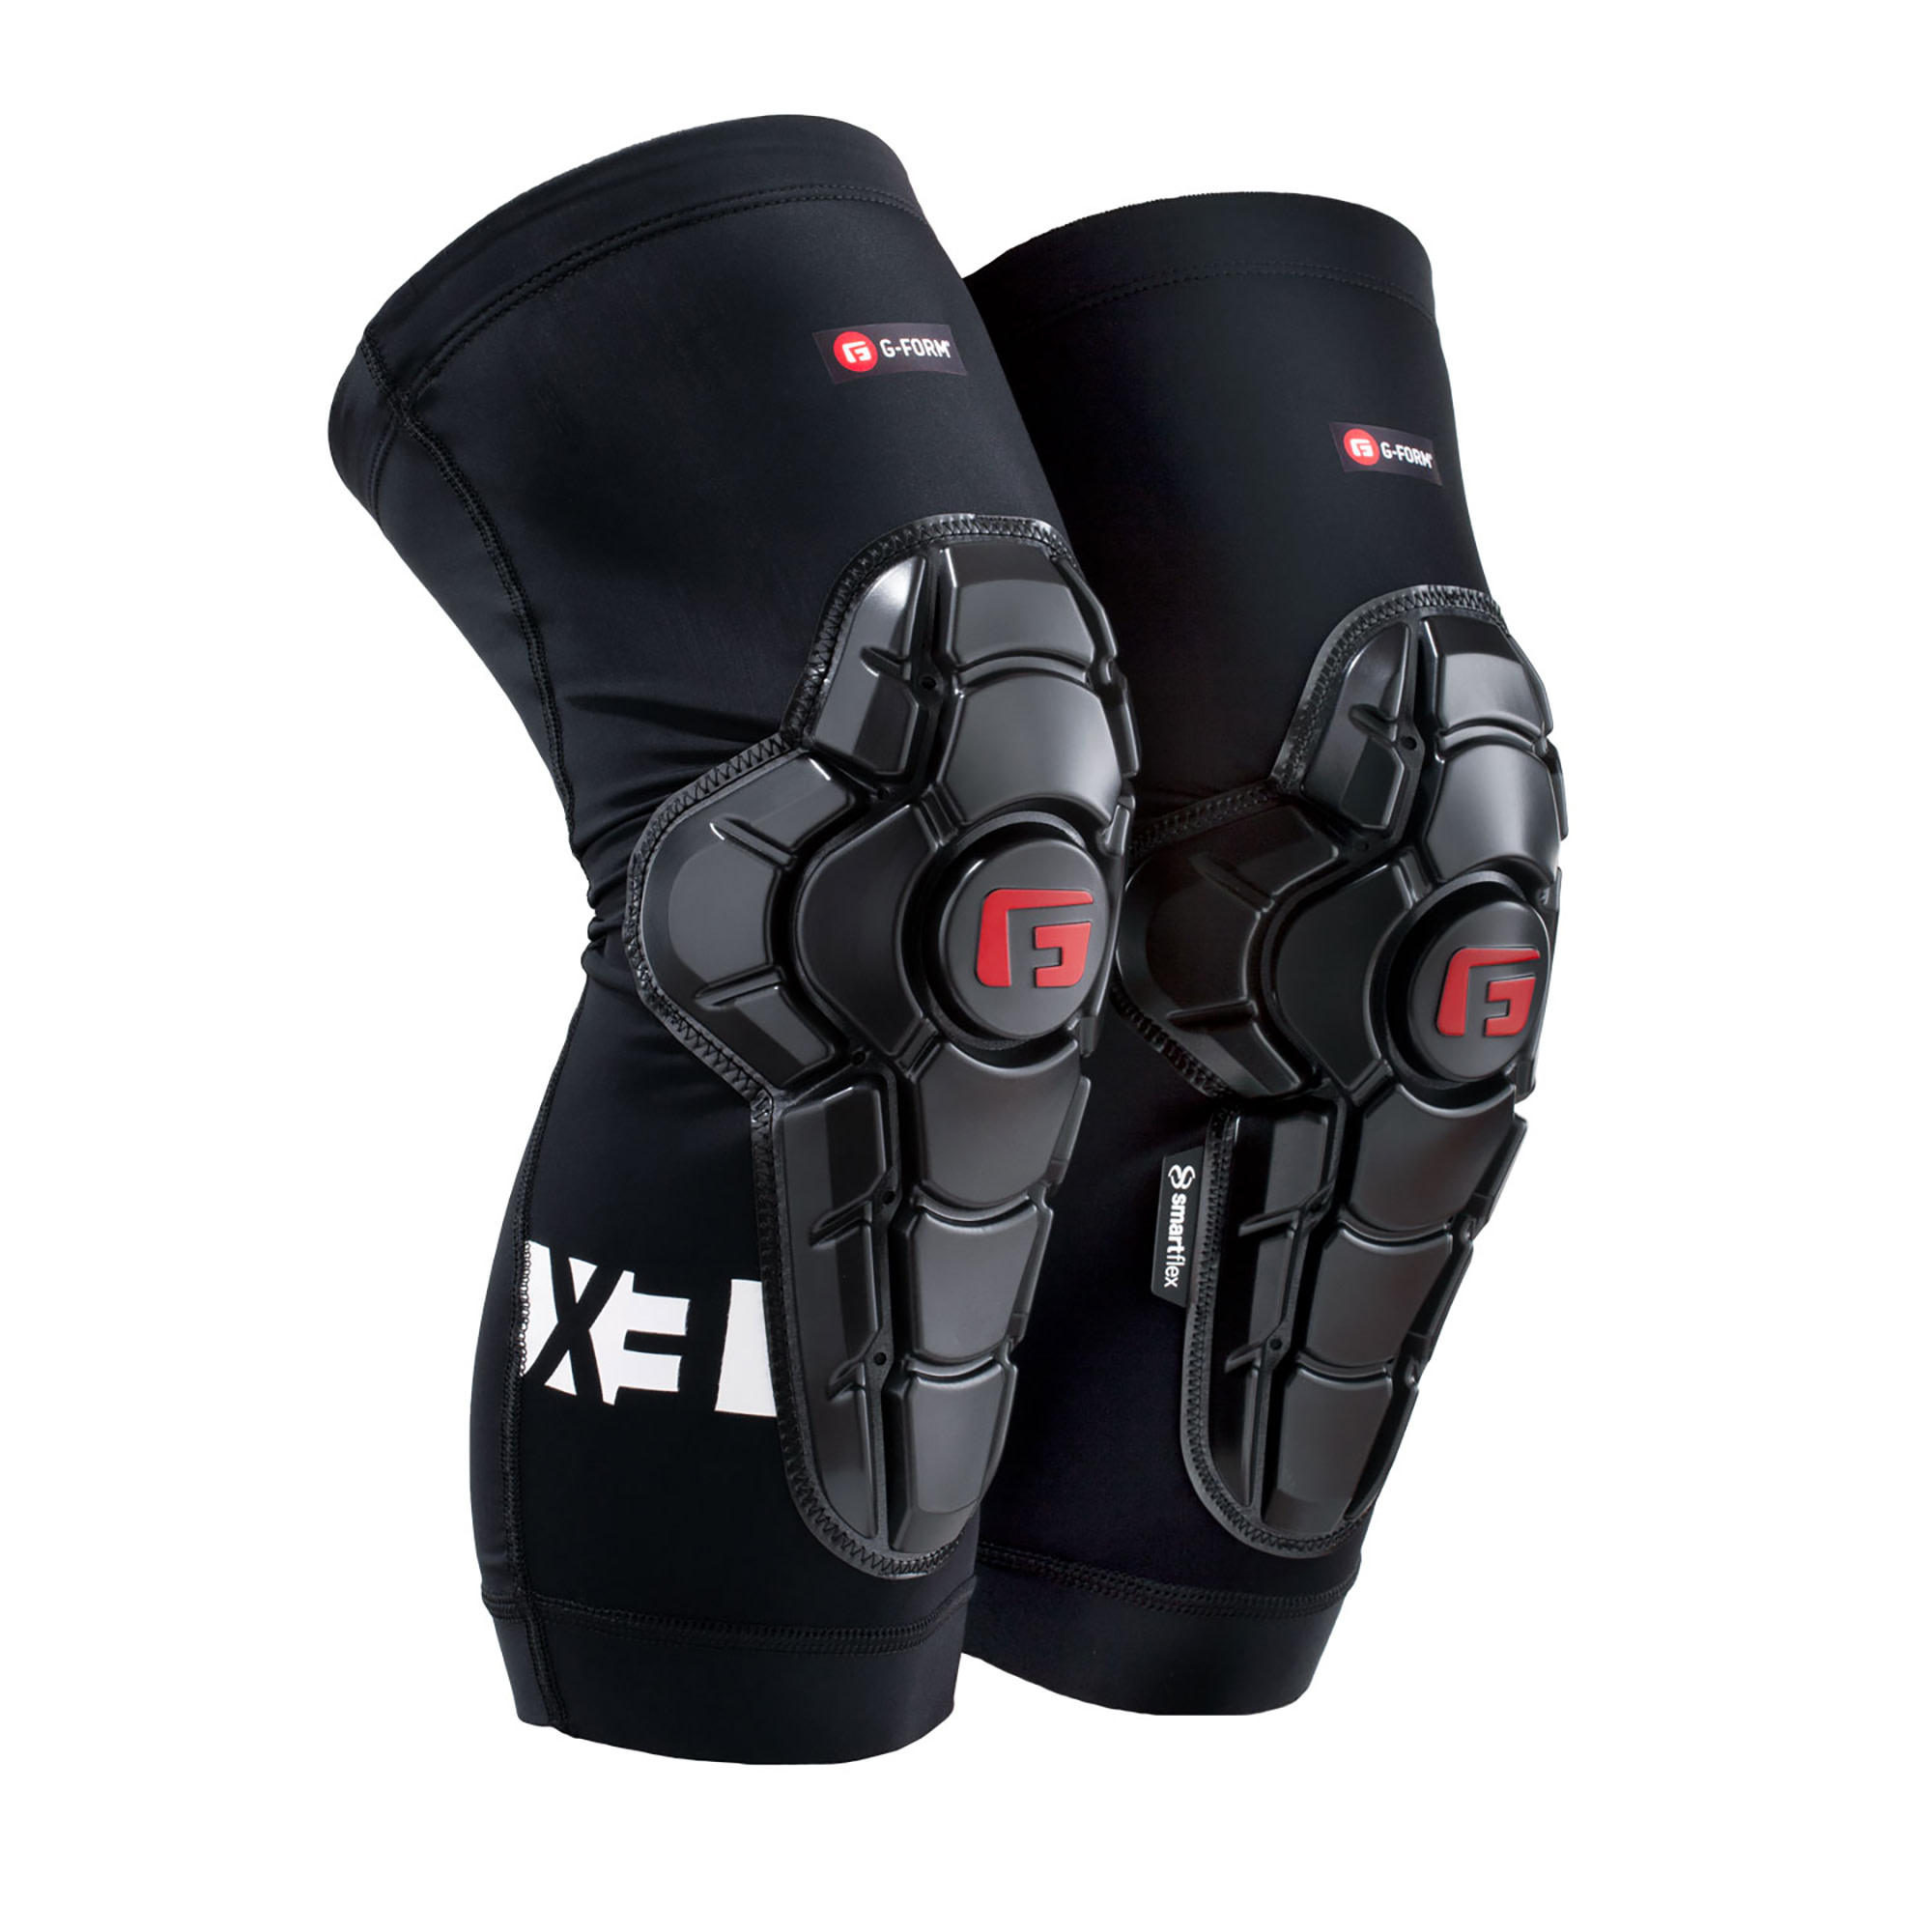 G-Form Pro-X3 Knee Protector